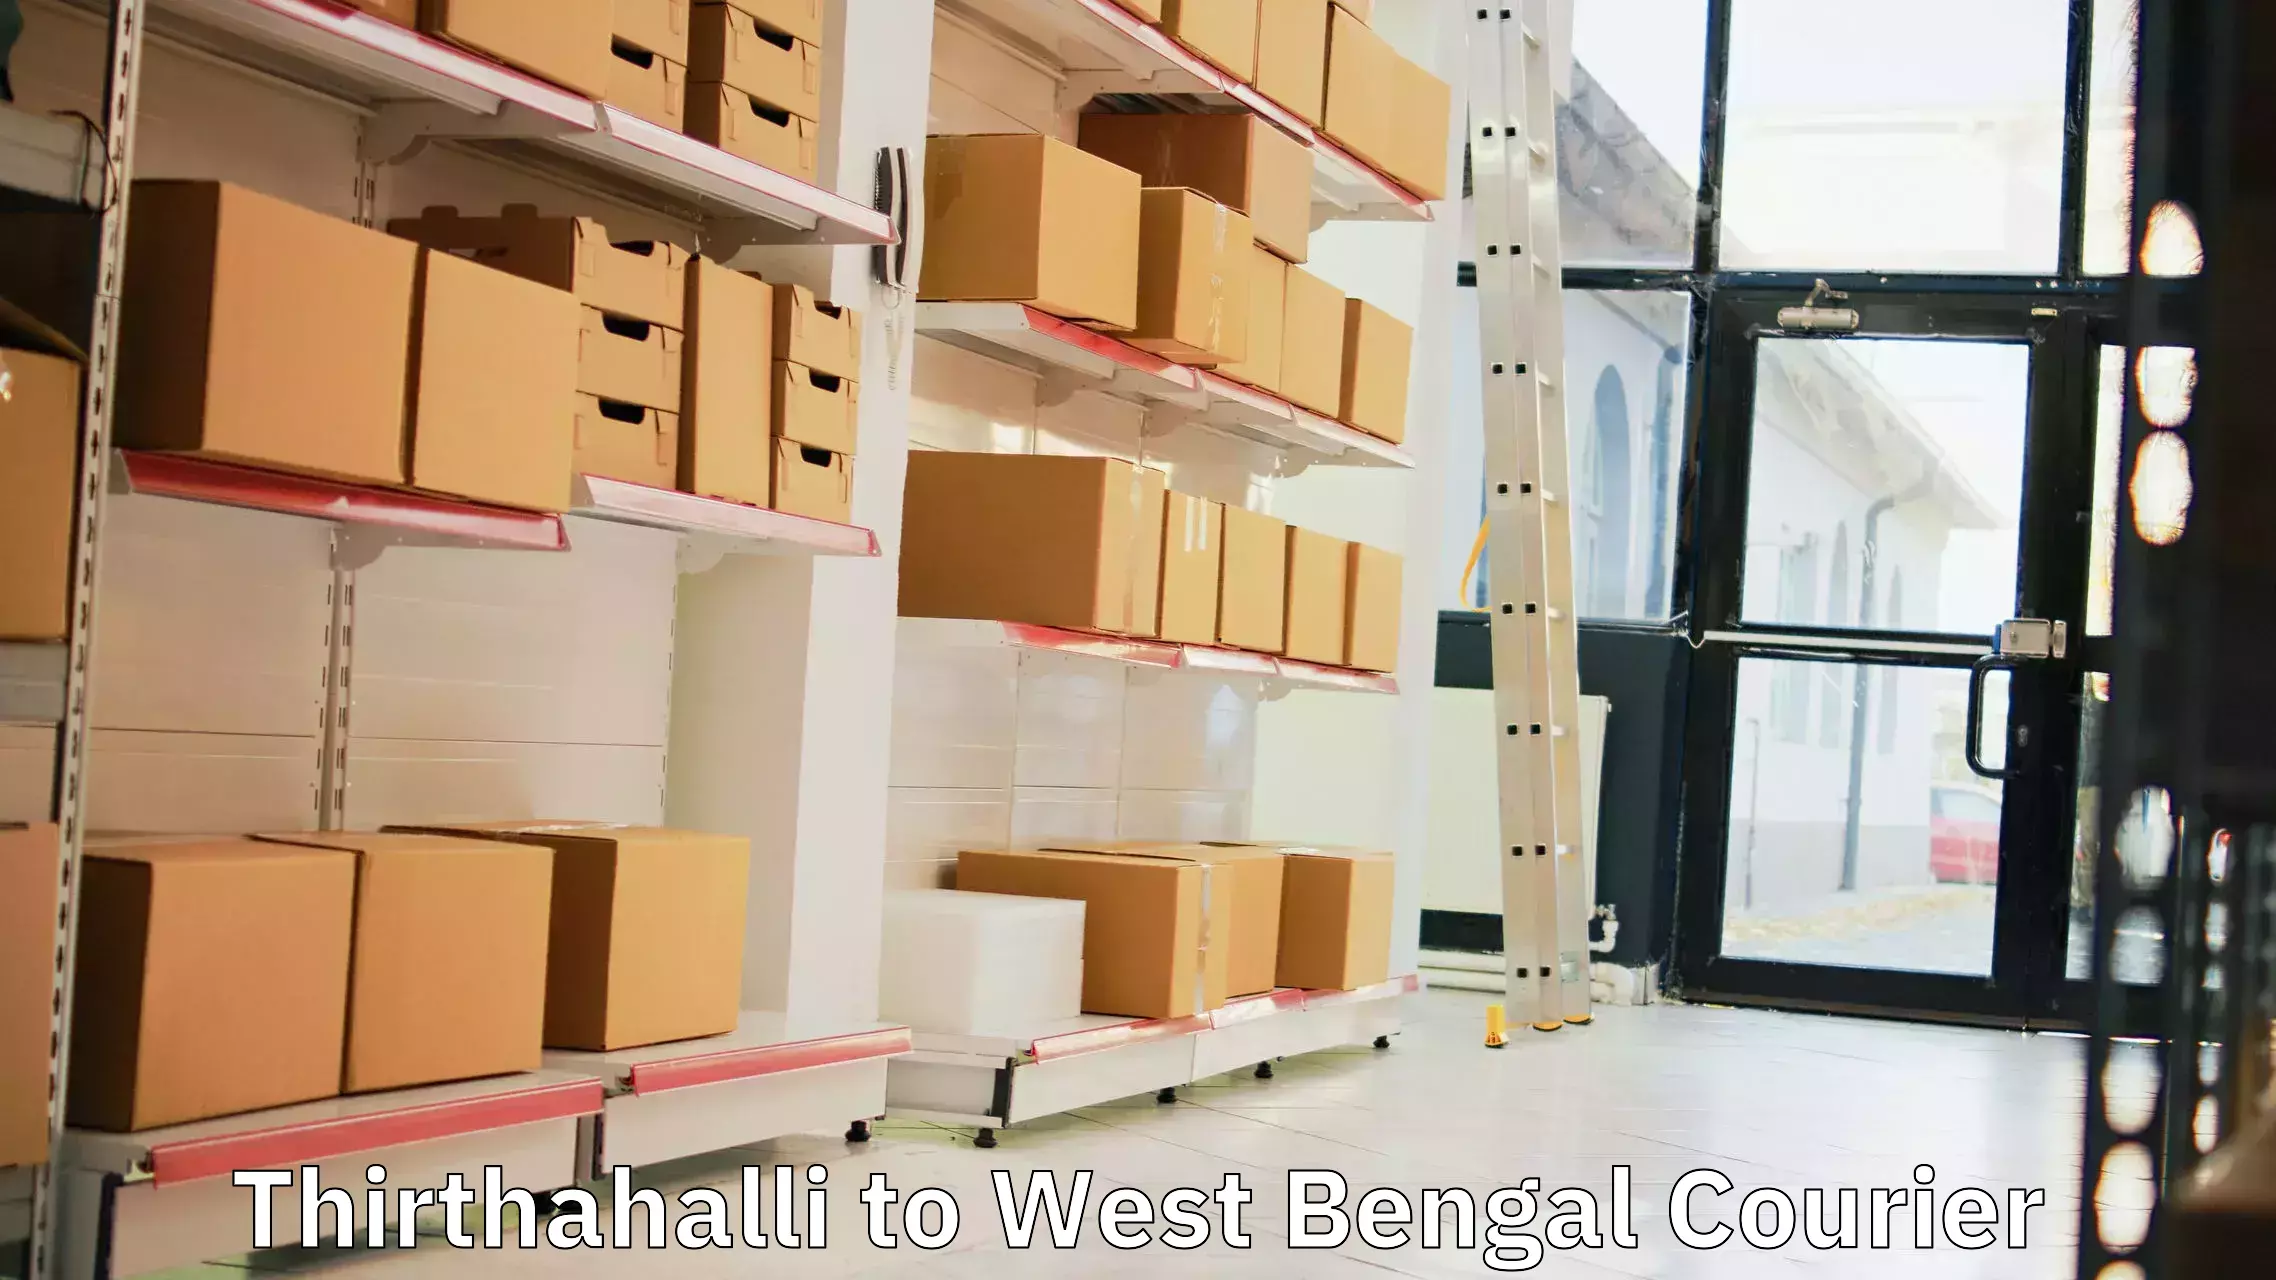 Premium courier services in Thirthahalli to West Bengal